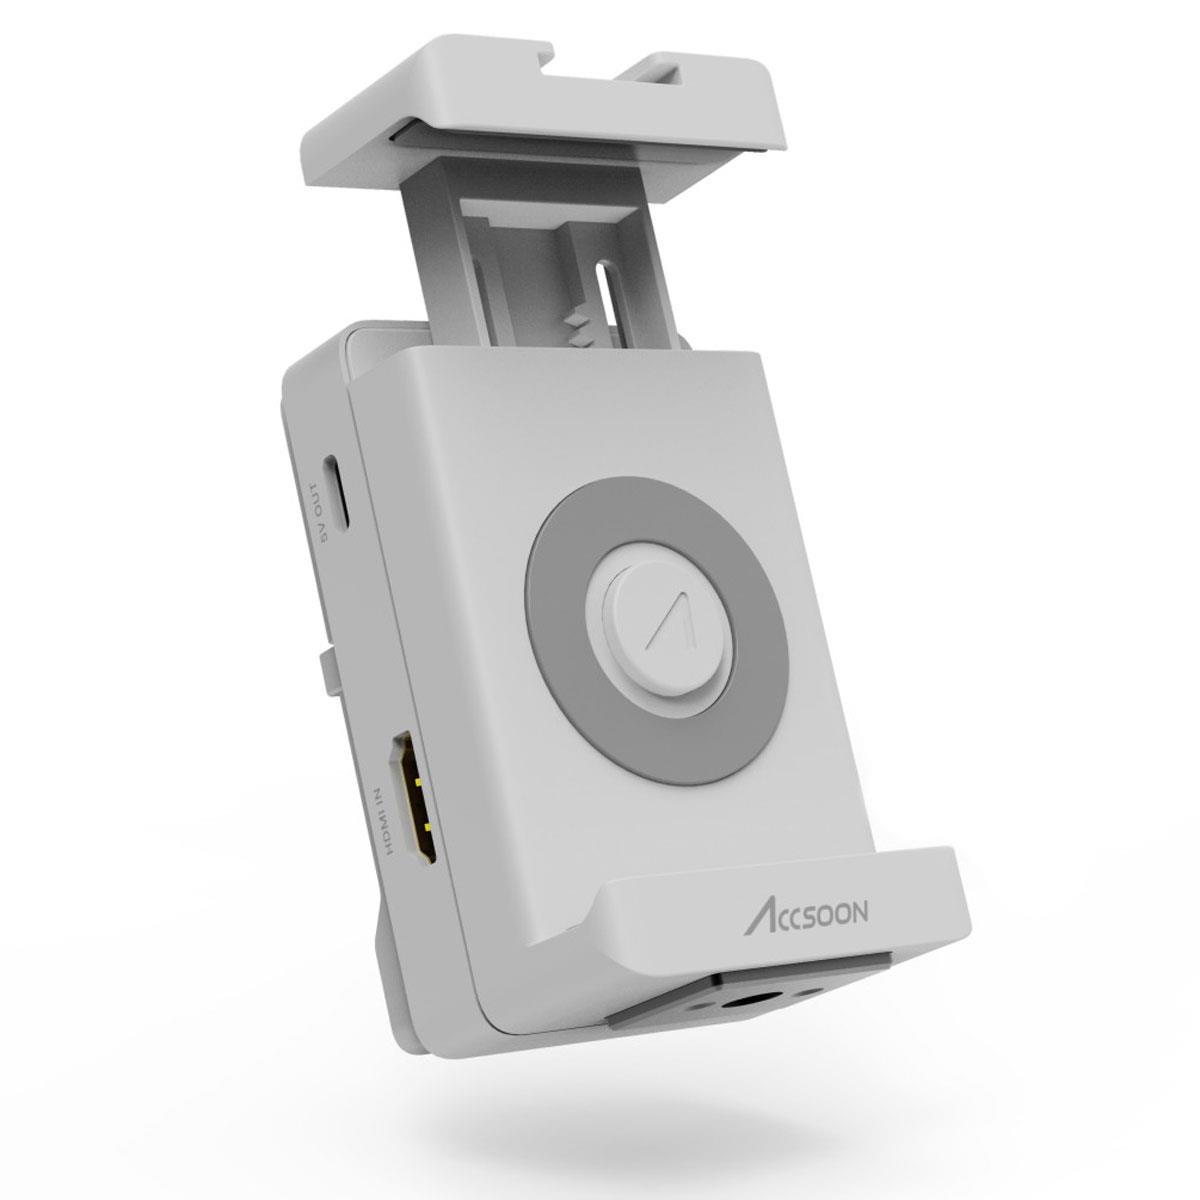 Image of Accsoon SeeMo HDMI to USB-C Video Capture Adapter for Apple iPhone/iPad